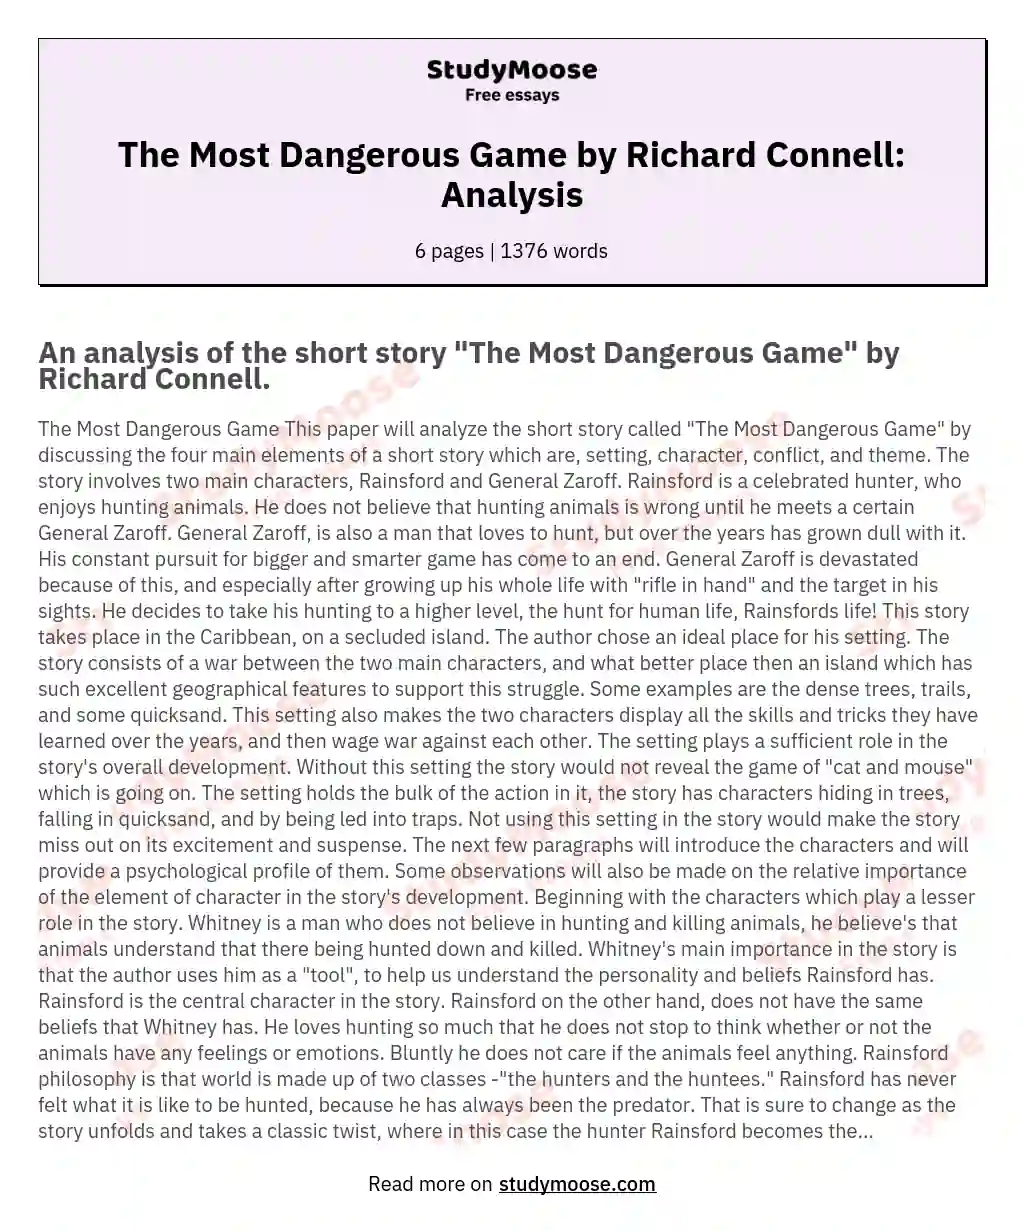 The Most Dangerous Game by Richard Connell: Analysis essay